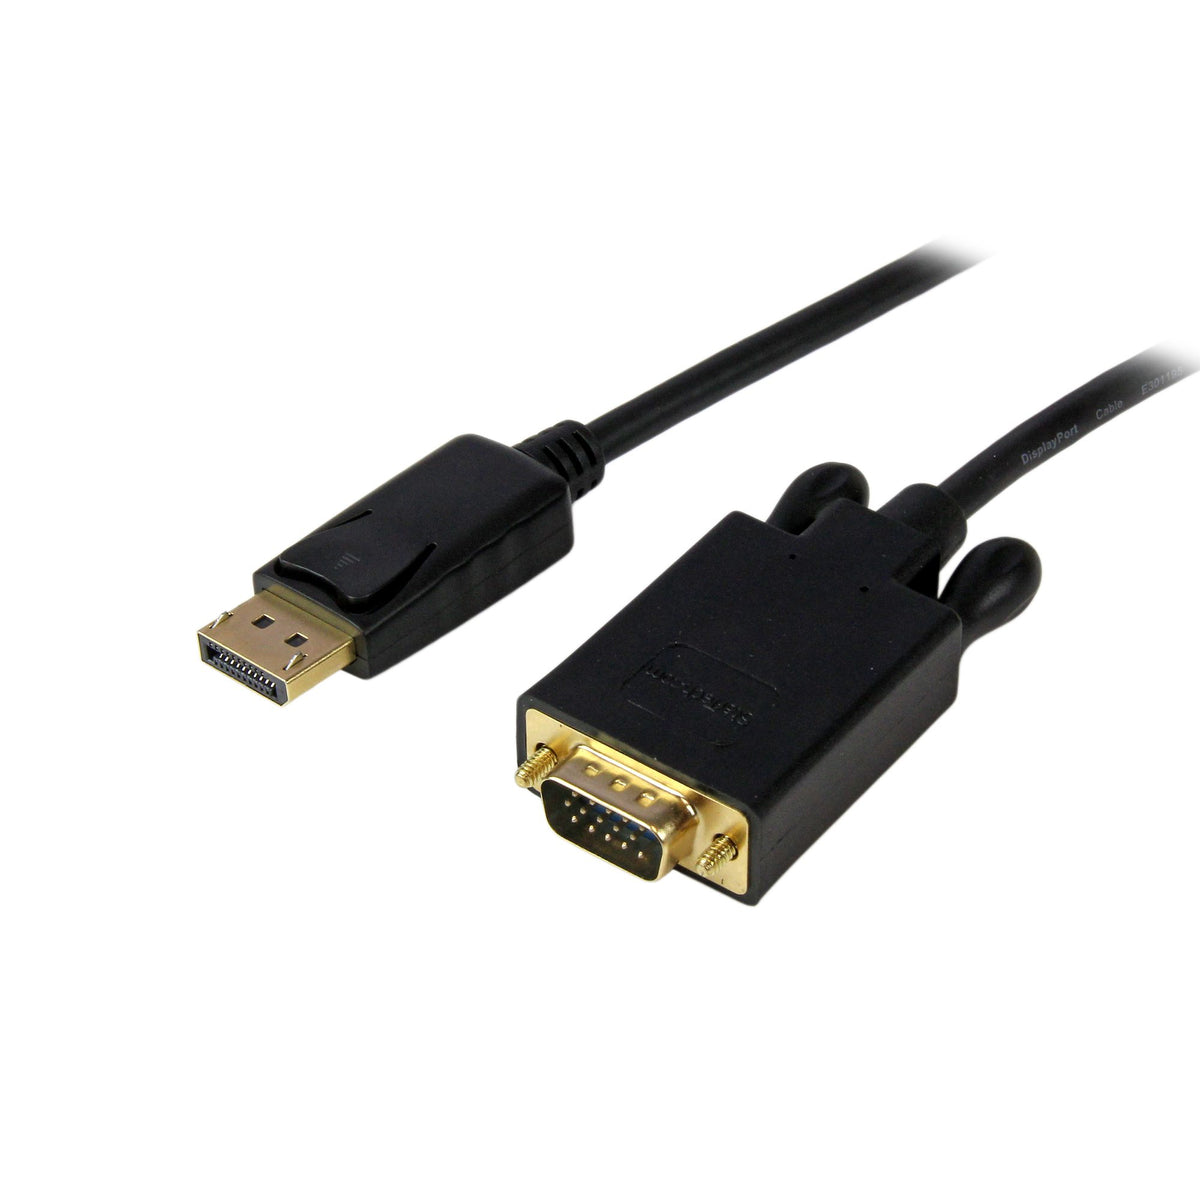 StarTech.com 10ft (3m) DisplayPort to VGA Cable - Active DisplayPort to VGA Adapter Cable - 1080p Video - DP to VGA Monitor Cable - DP 1.2 to VGA Converter - Latching DP Connector